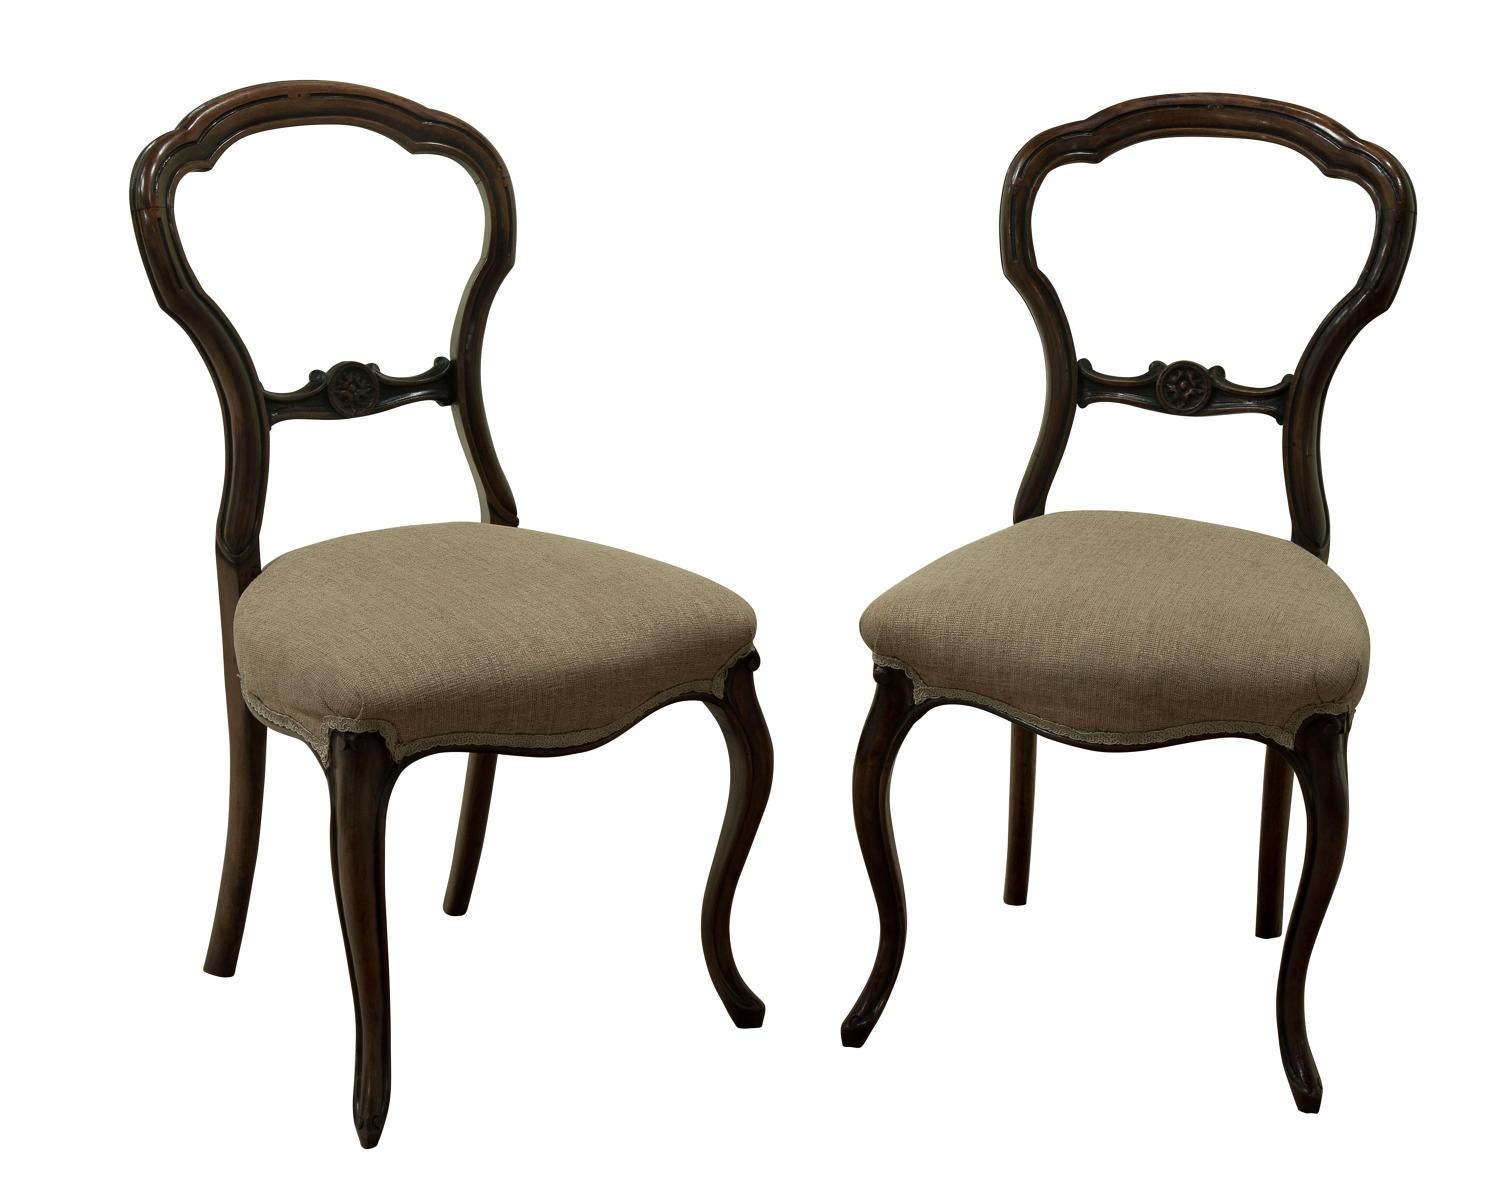 Pair of Victorian walnut side or dining chairs

circa 1860.